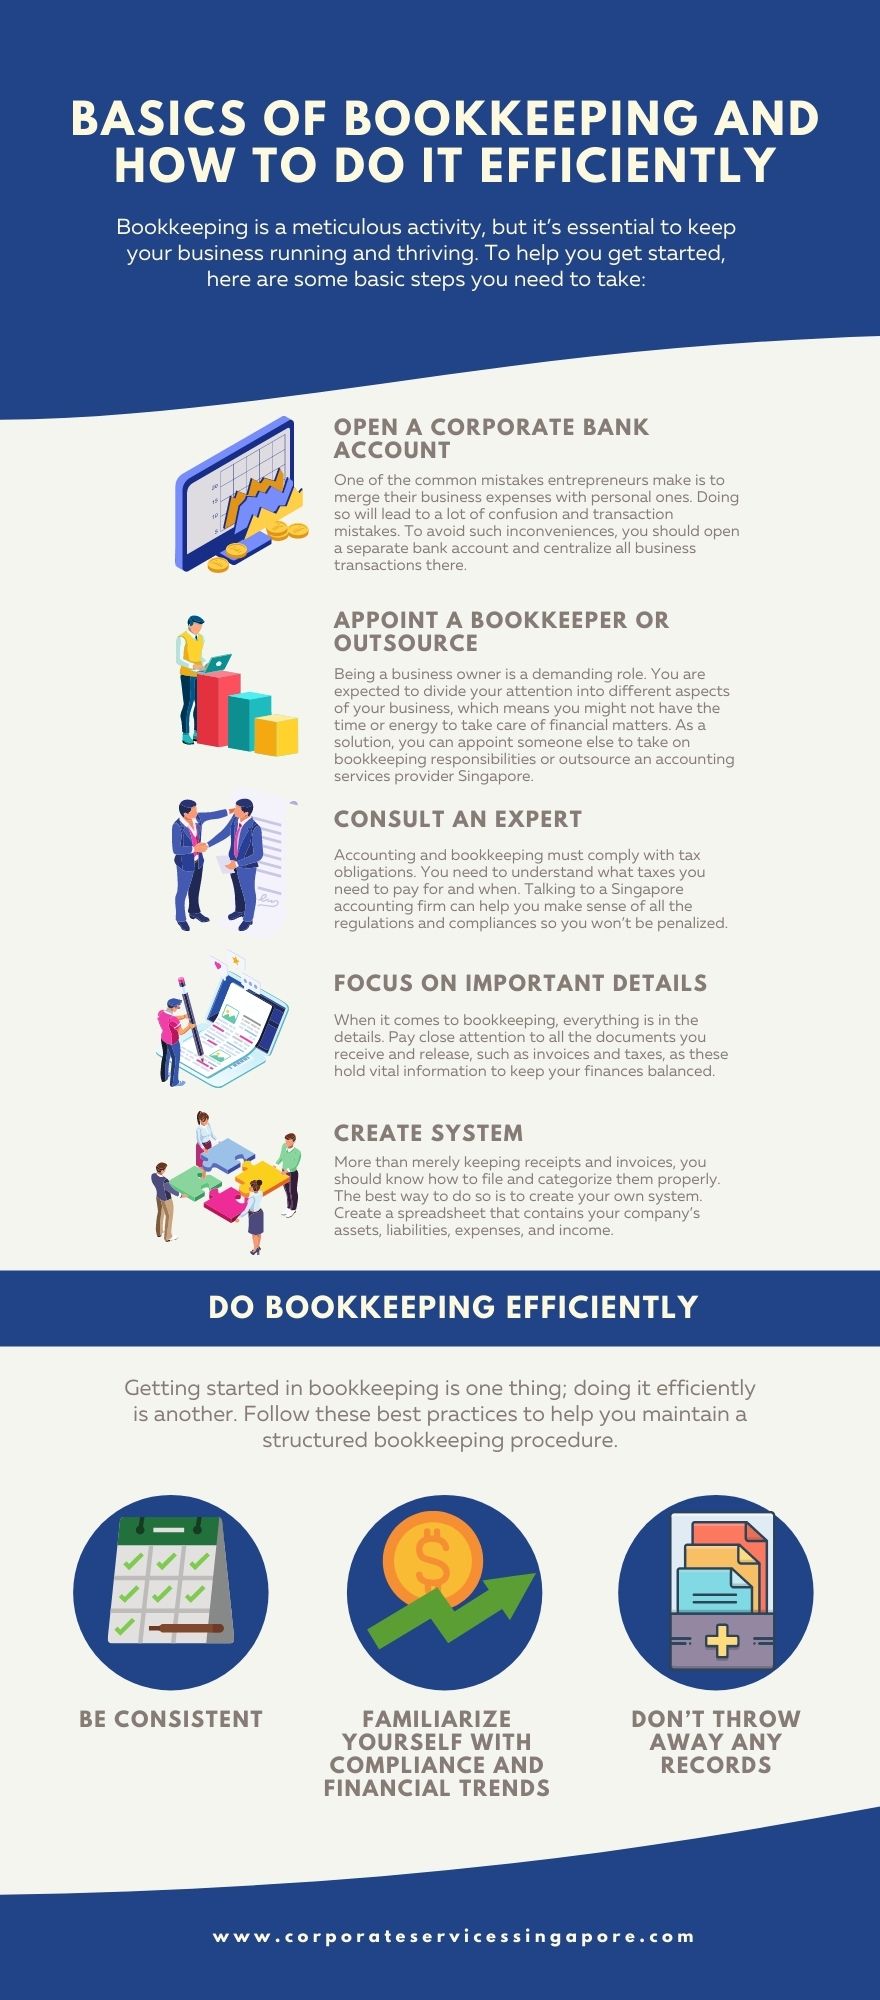 Basics of Bookkeeping and How to Do It Efficiently.jpg